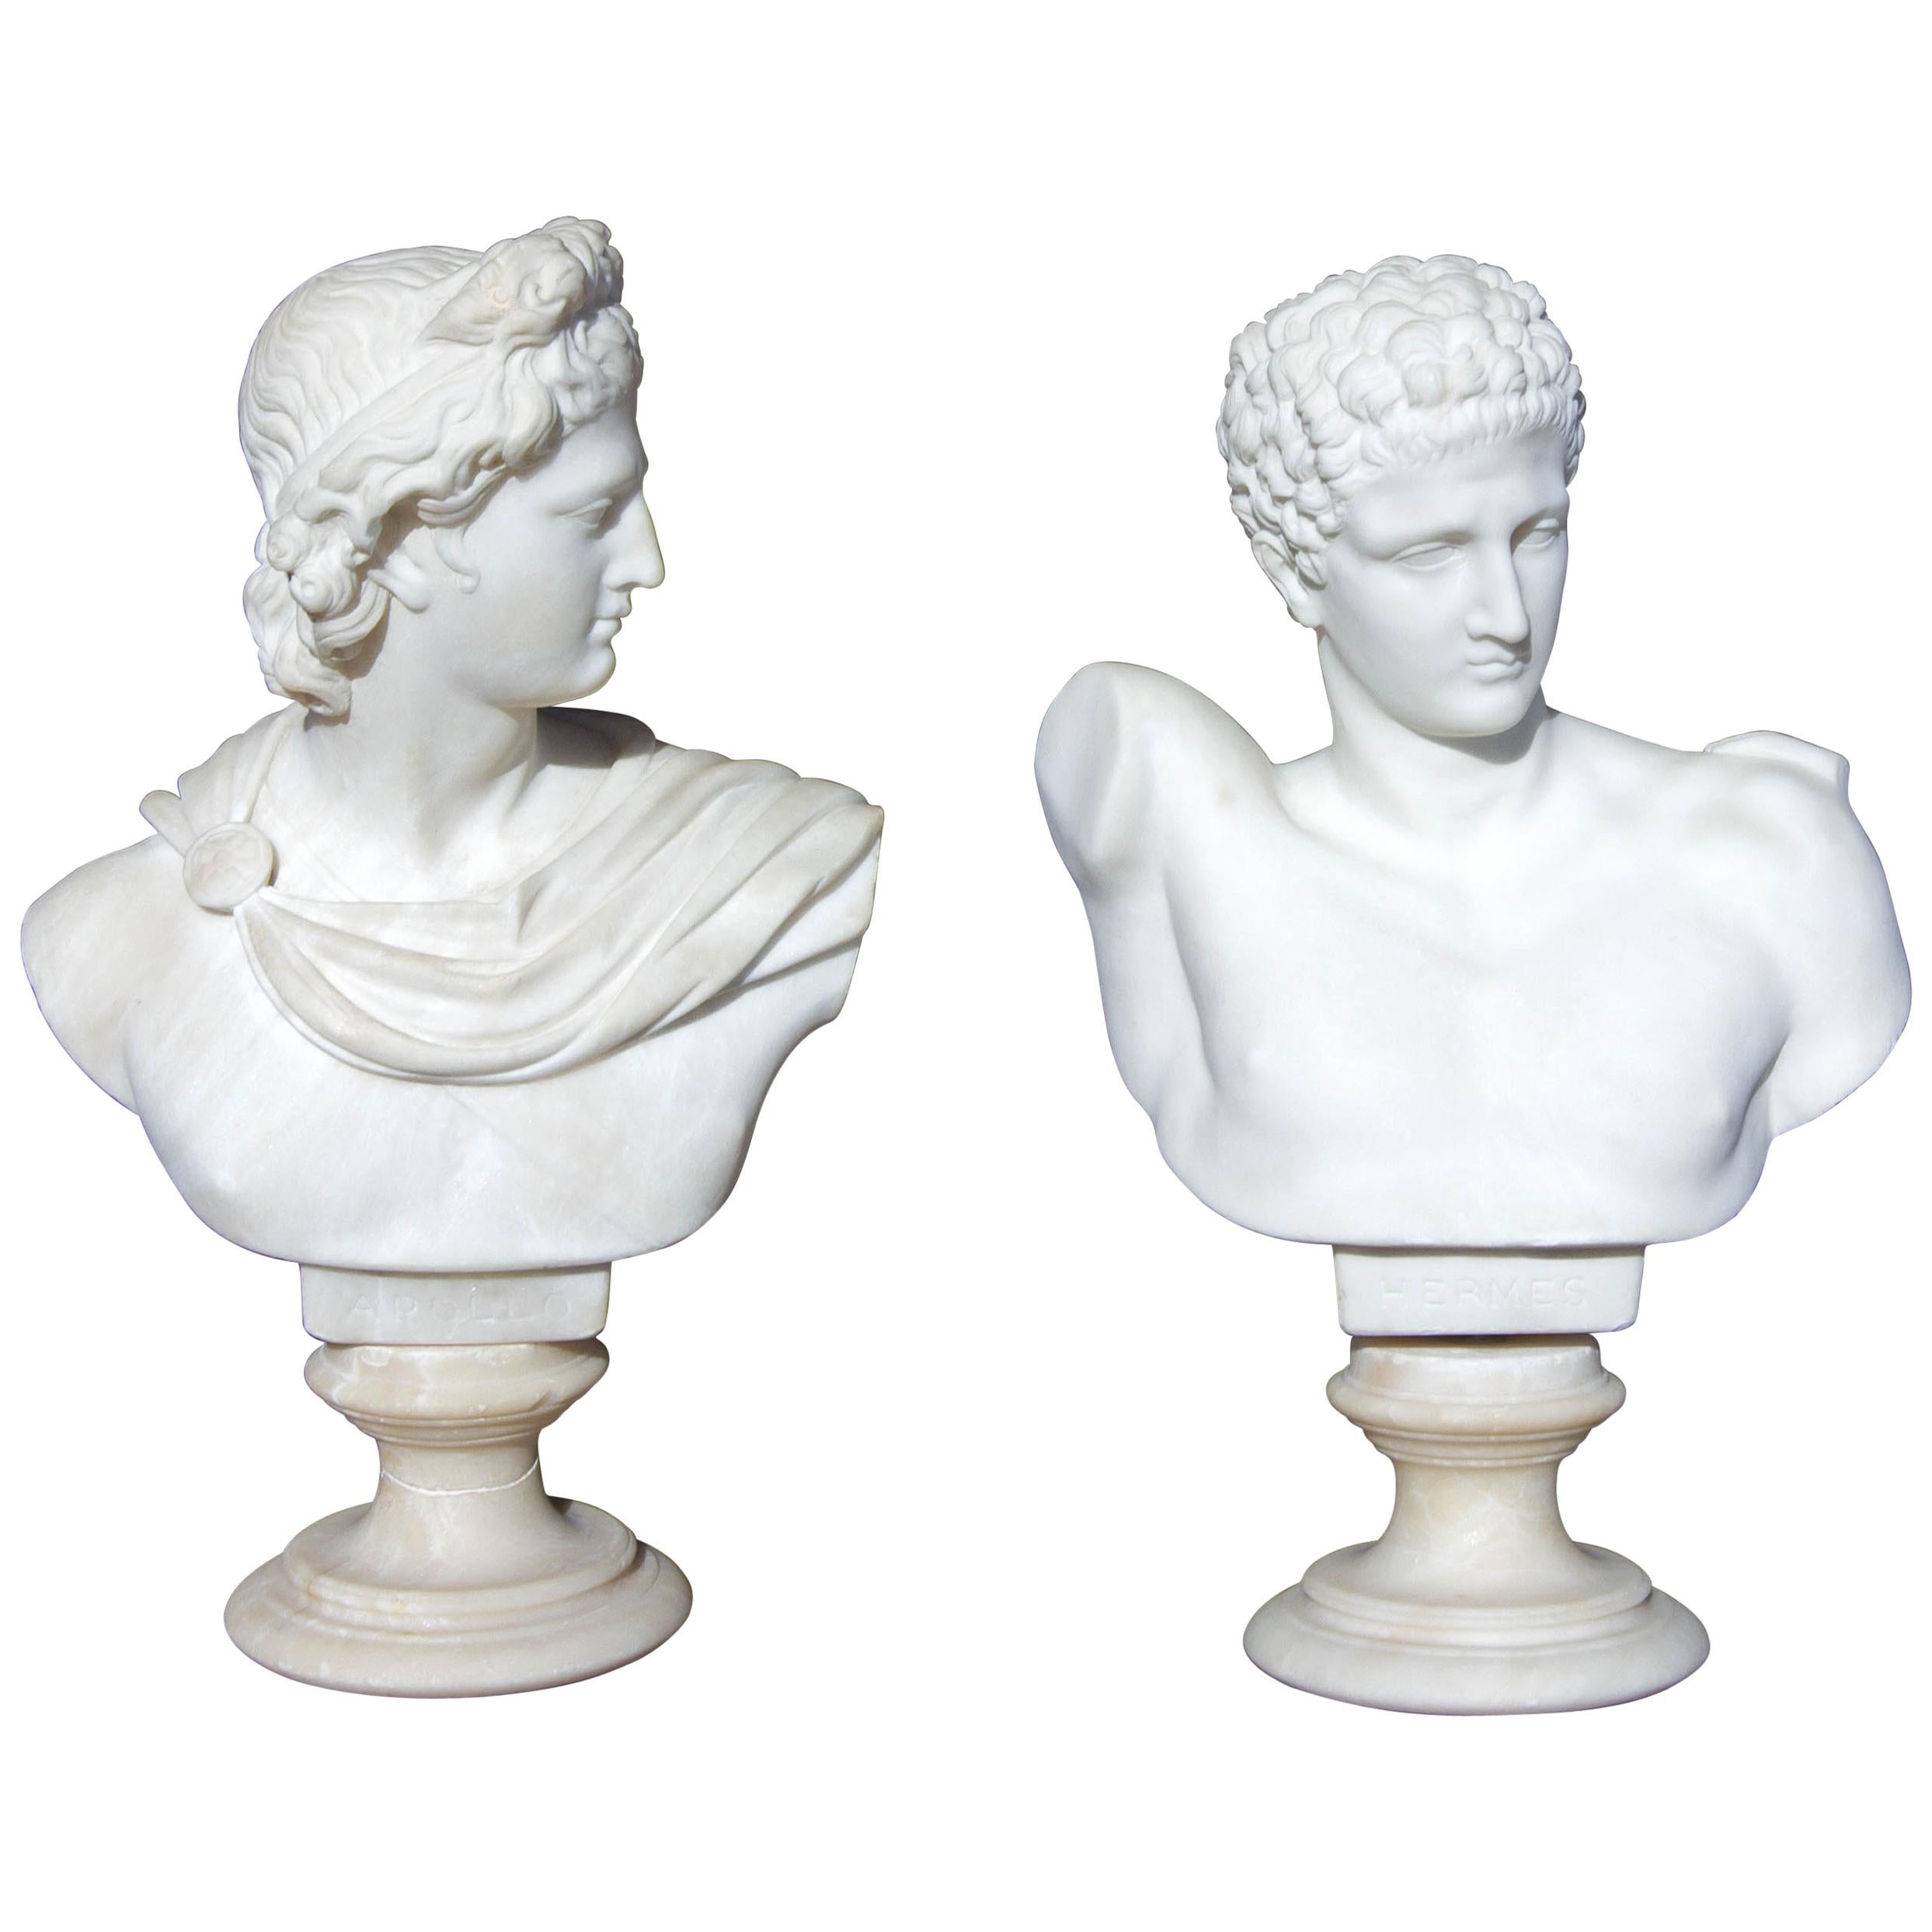 Hermes and Apollo a Pair of 19th Century Marble Busts